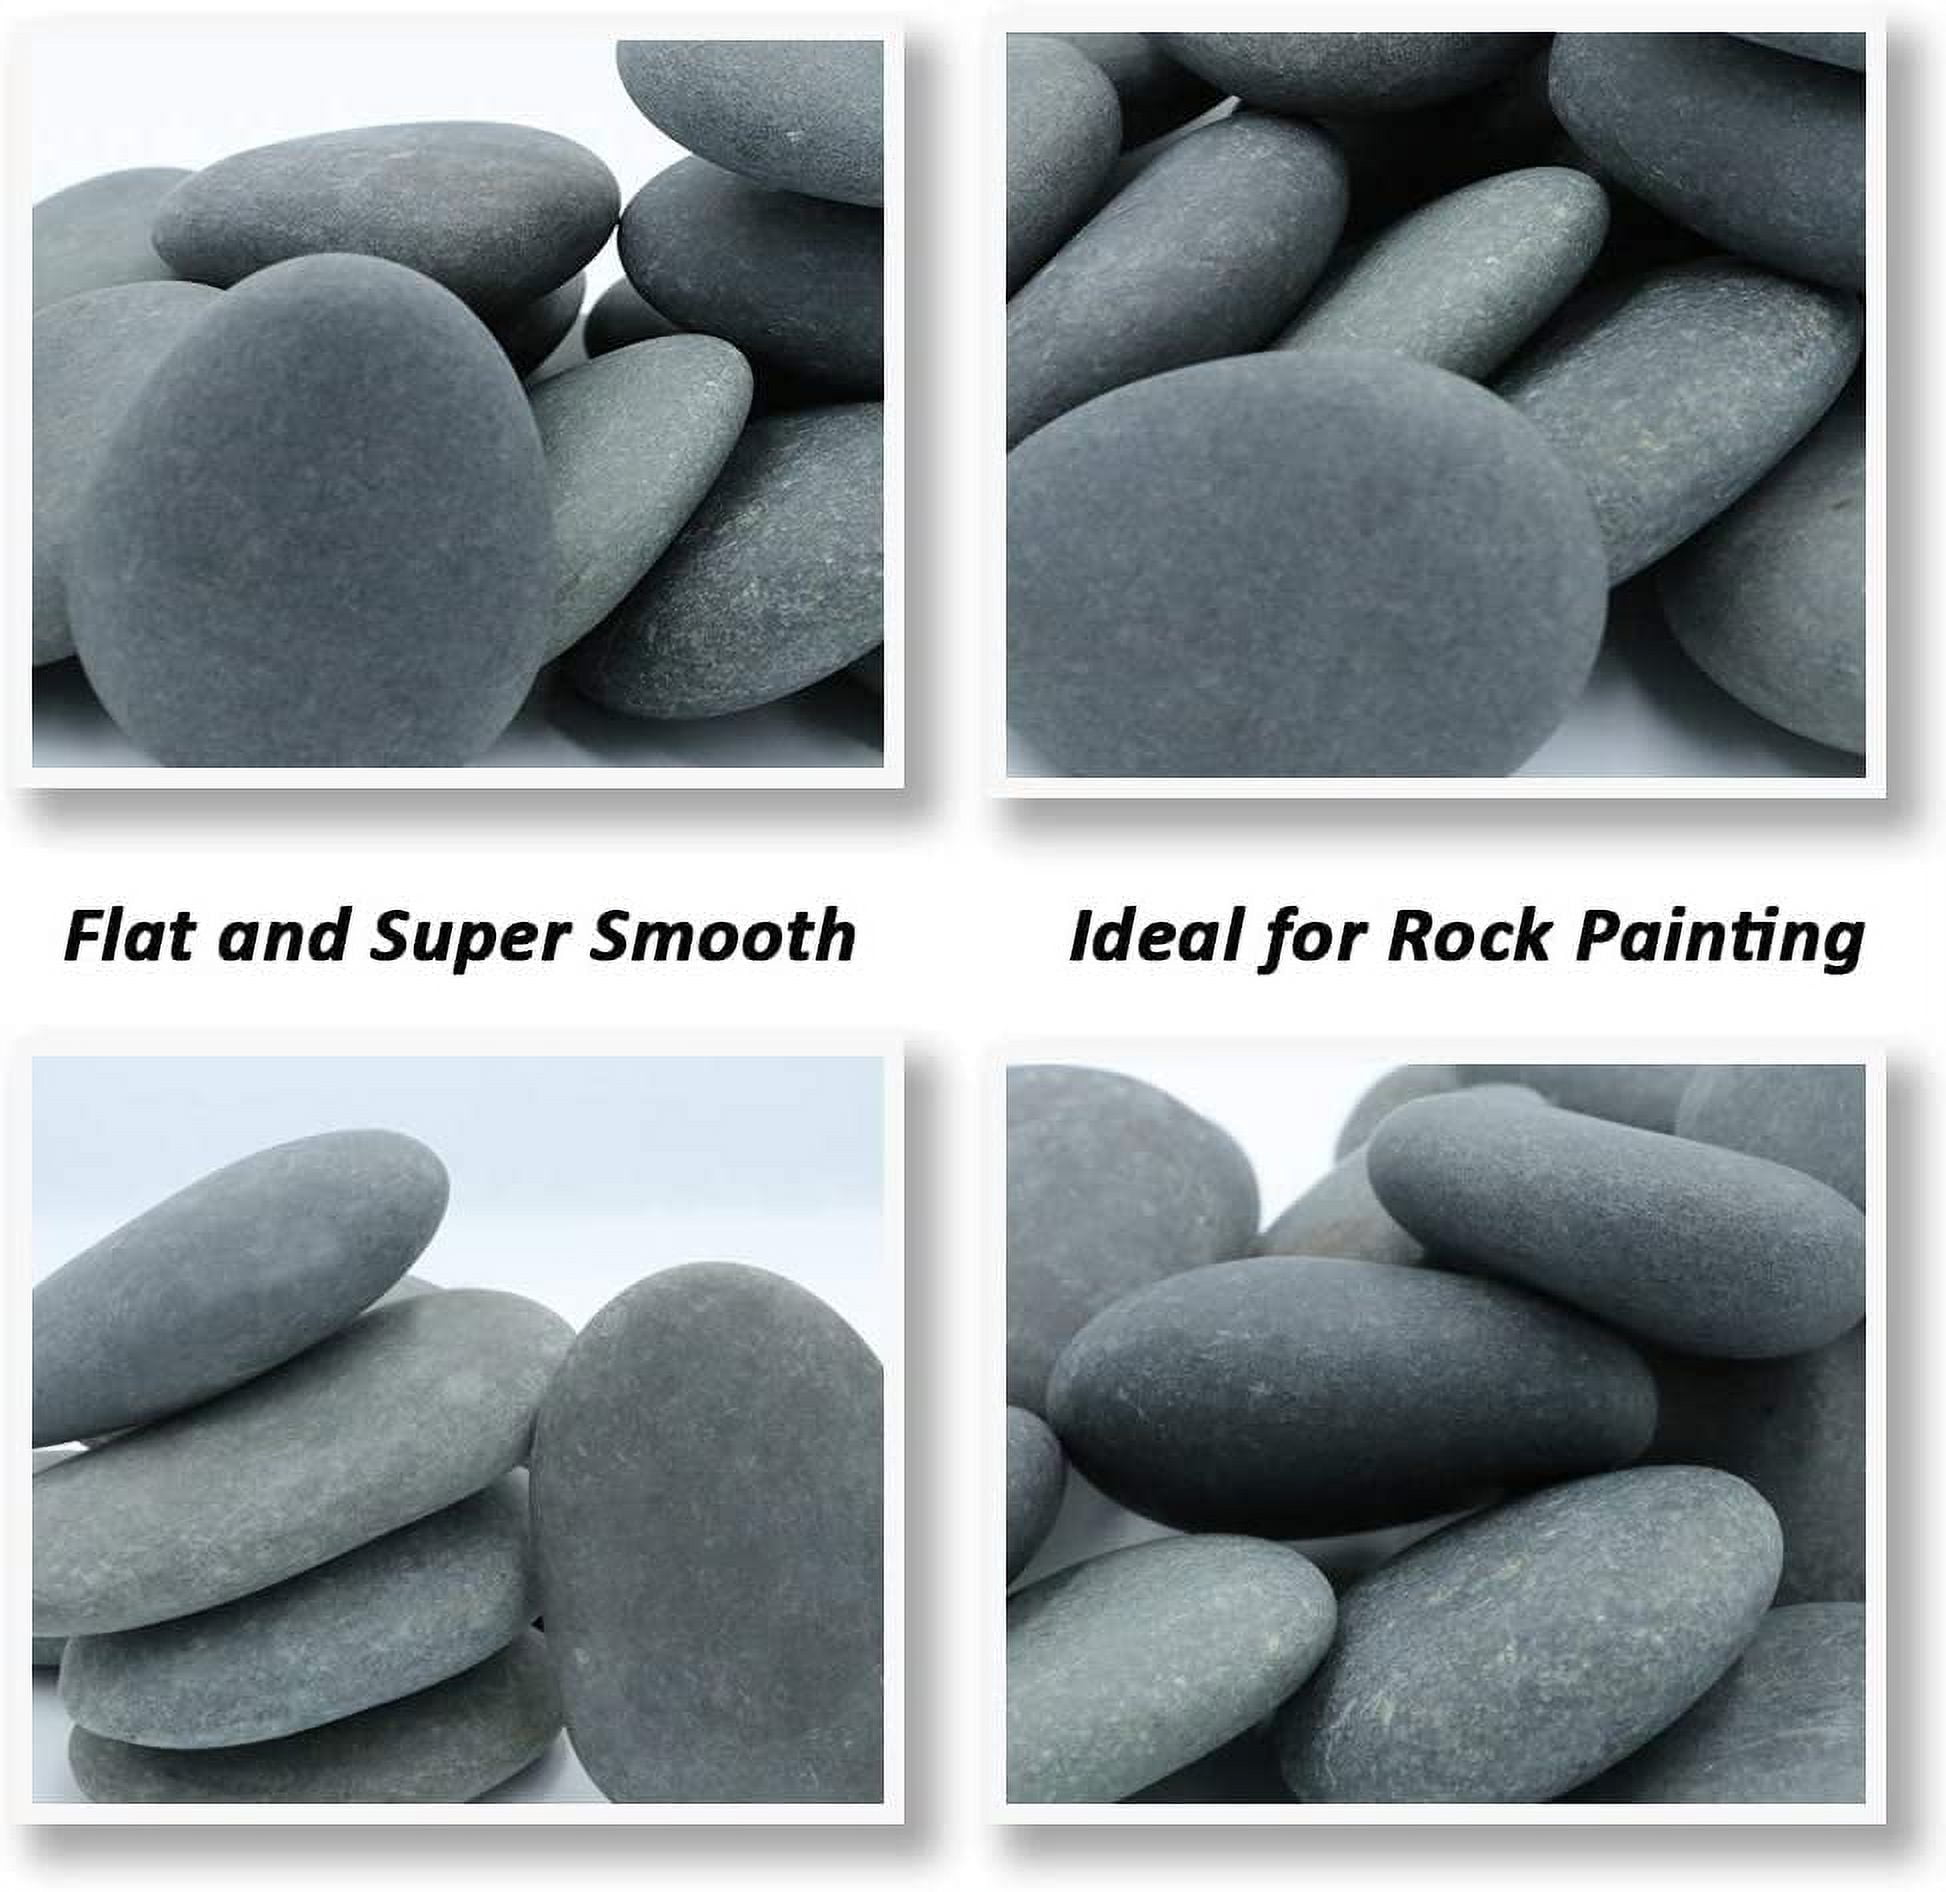 Koltose by Mash Bulk White River Rocks for Painting – 40 Big Rocks, 2” - 3.5” inch Flat Smooth Stones, About 12 lb. of Craft Rocks F